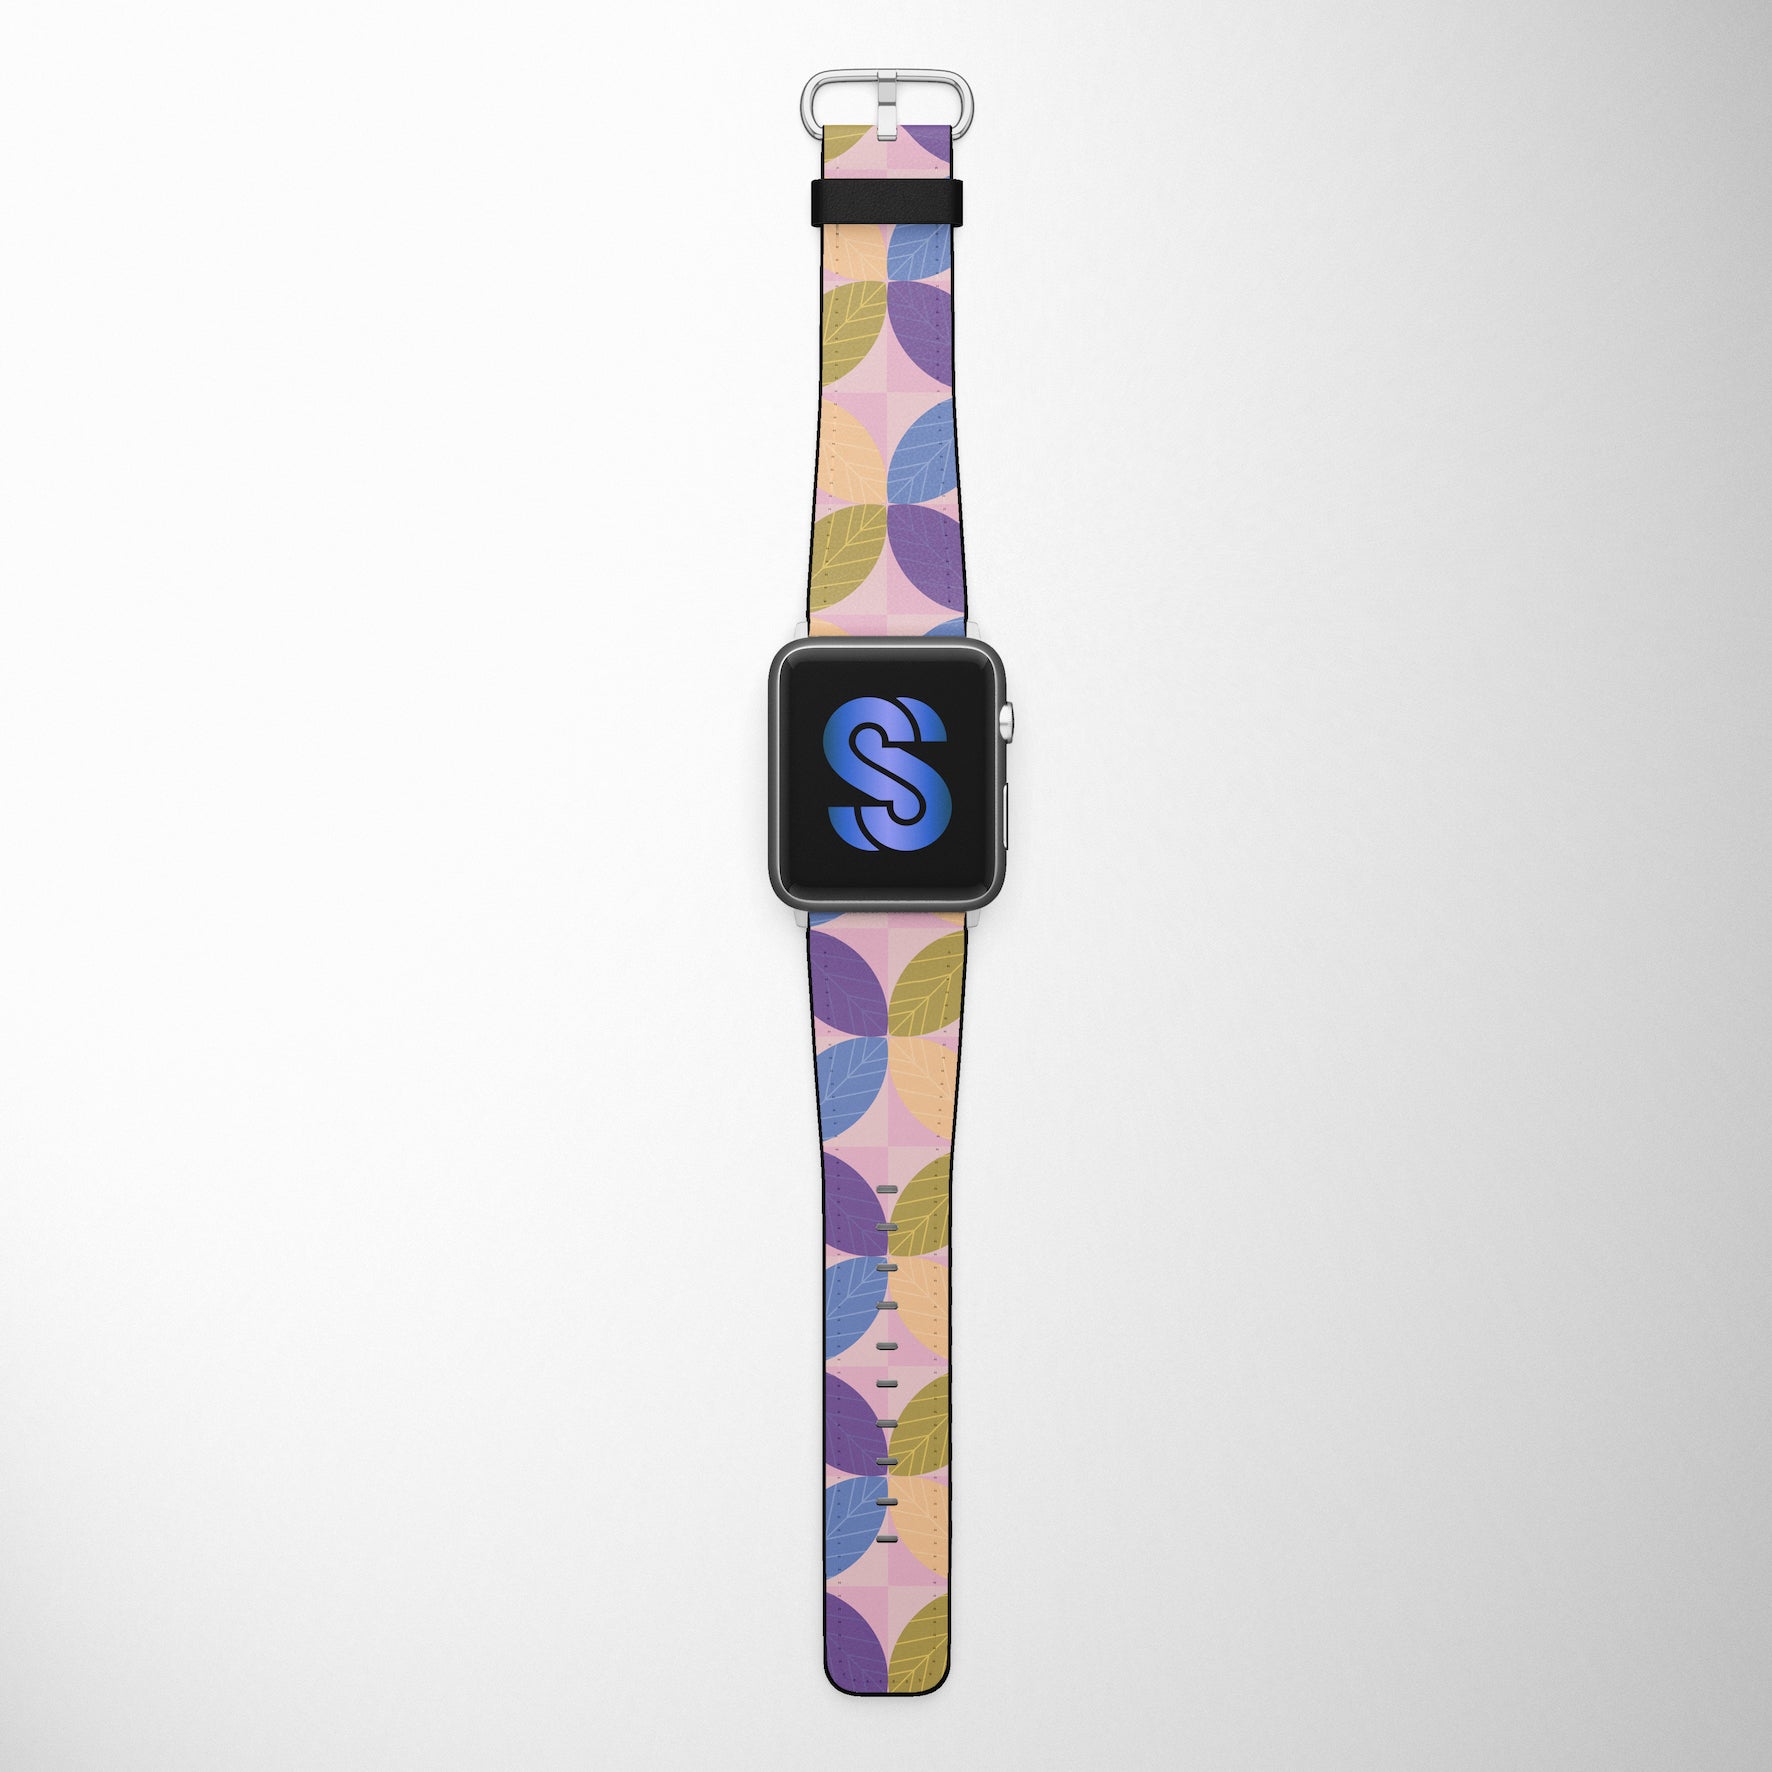 Floral Leaf Pattern Faux Leather Apple Watch Band for Apple Watch 1,2,3,4,5,6,SE - www.scottsy.com